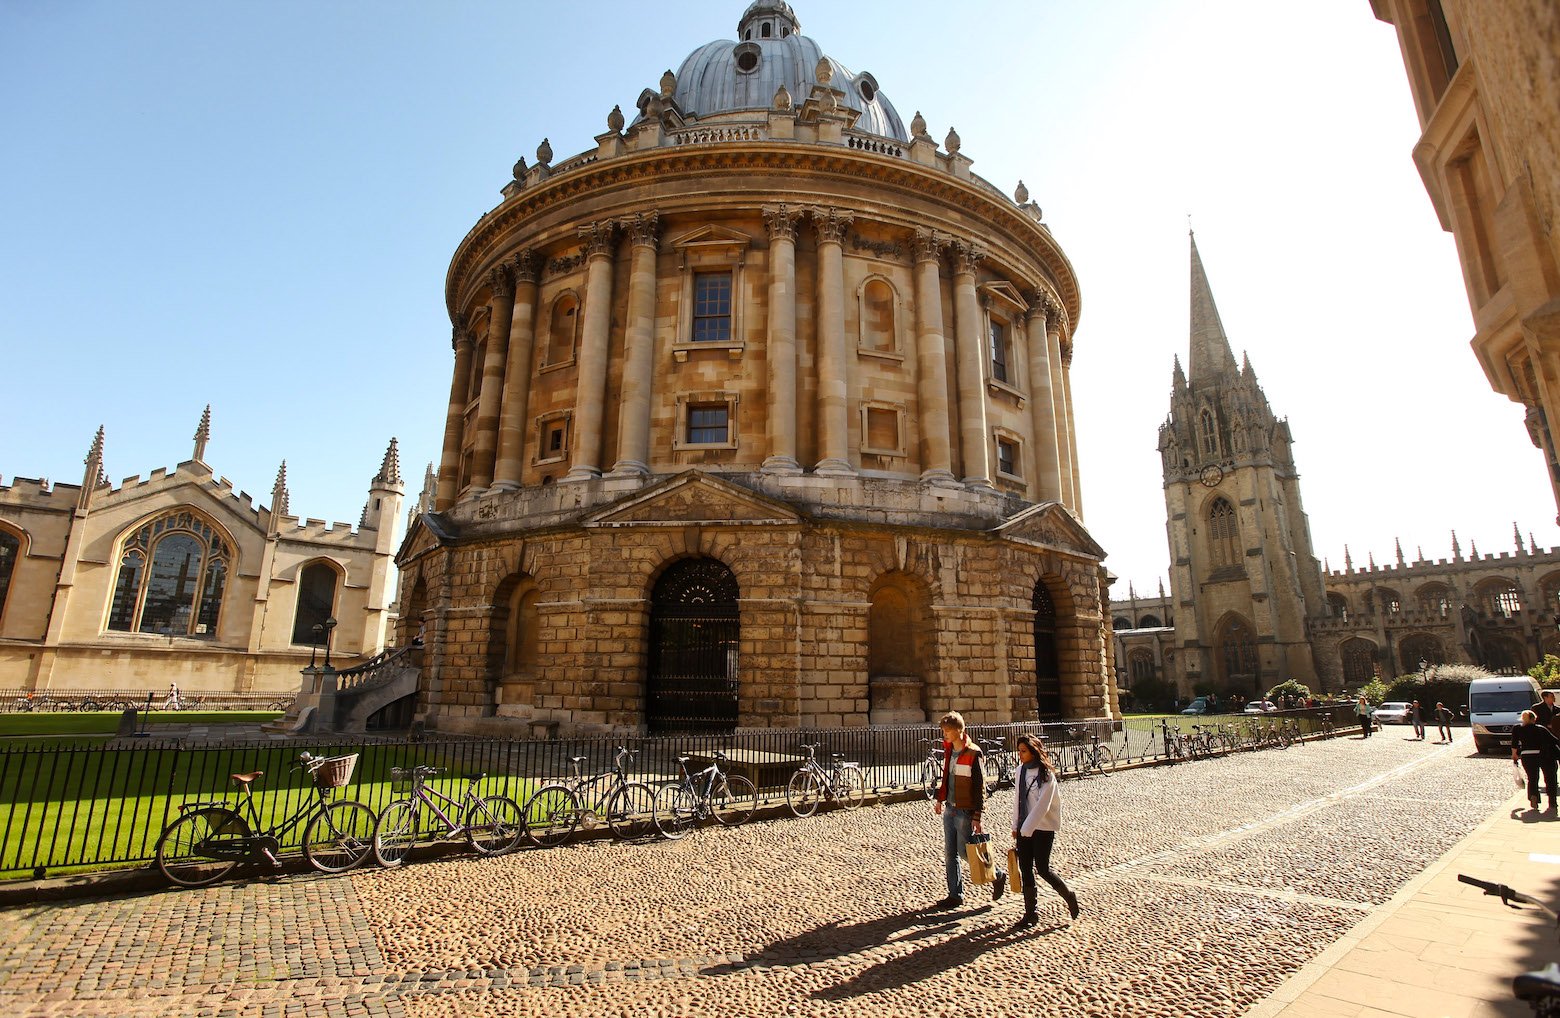 Do Oxford students really need trigger warnings? | The Spectator